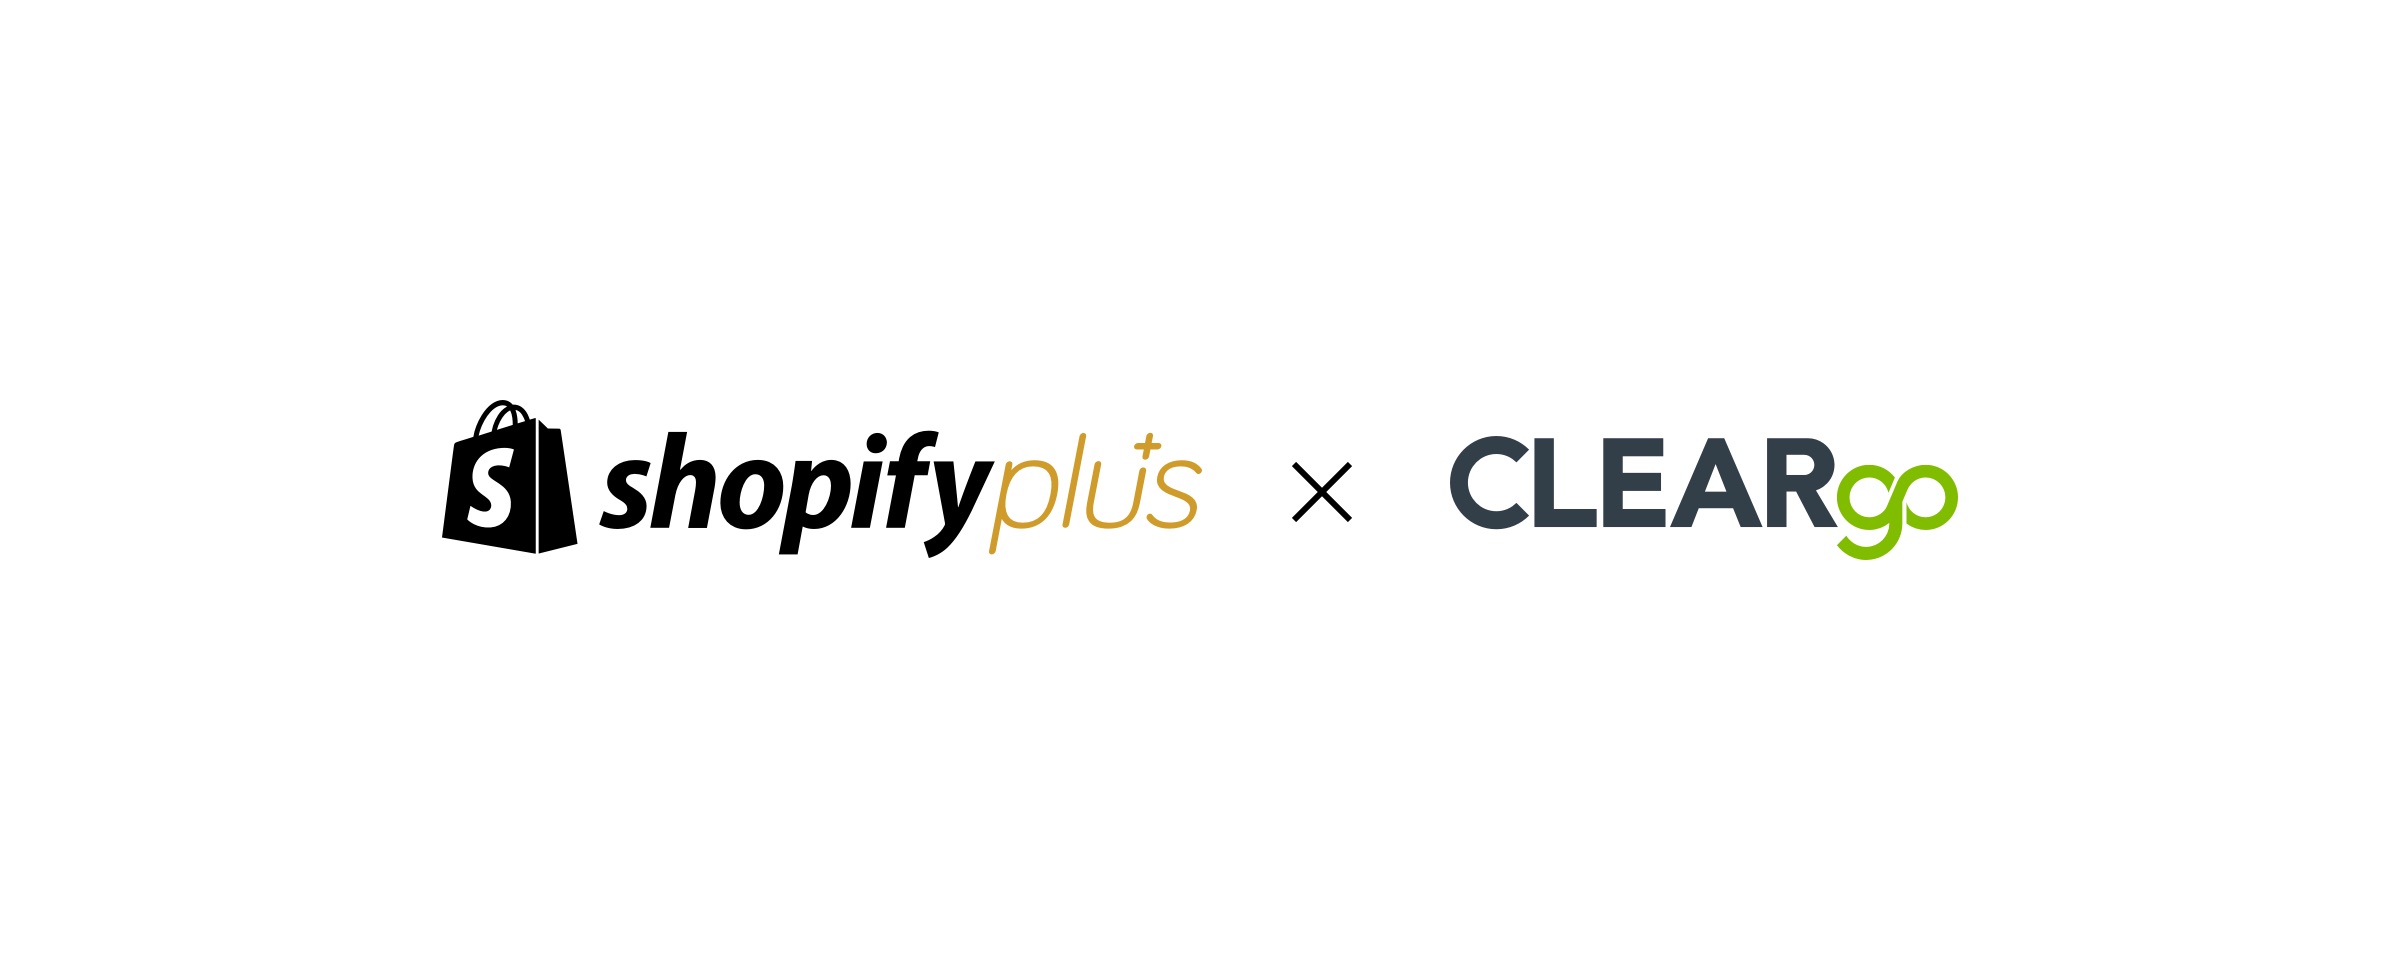 The Journey . CLEARgo x Shopify